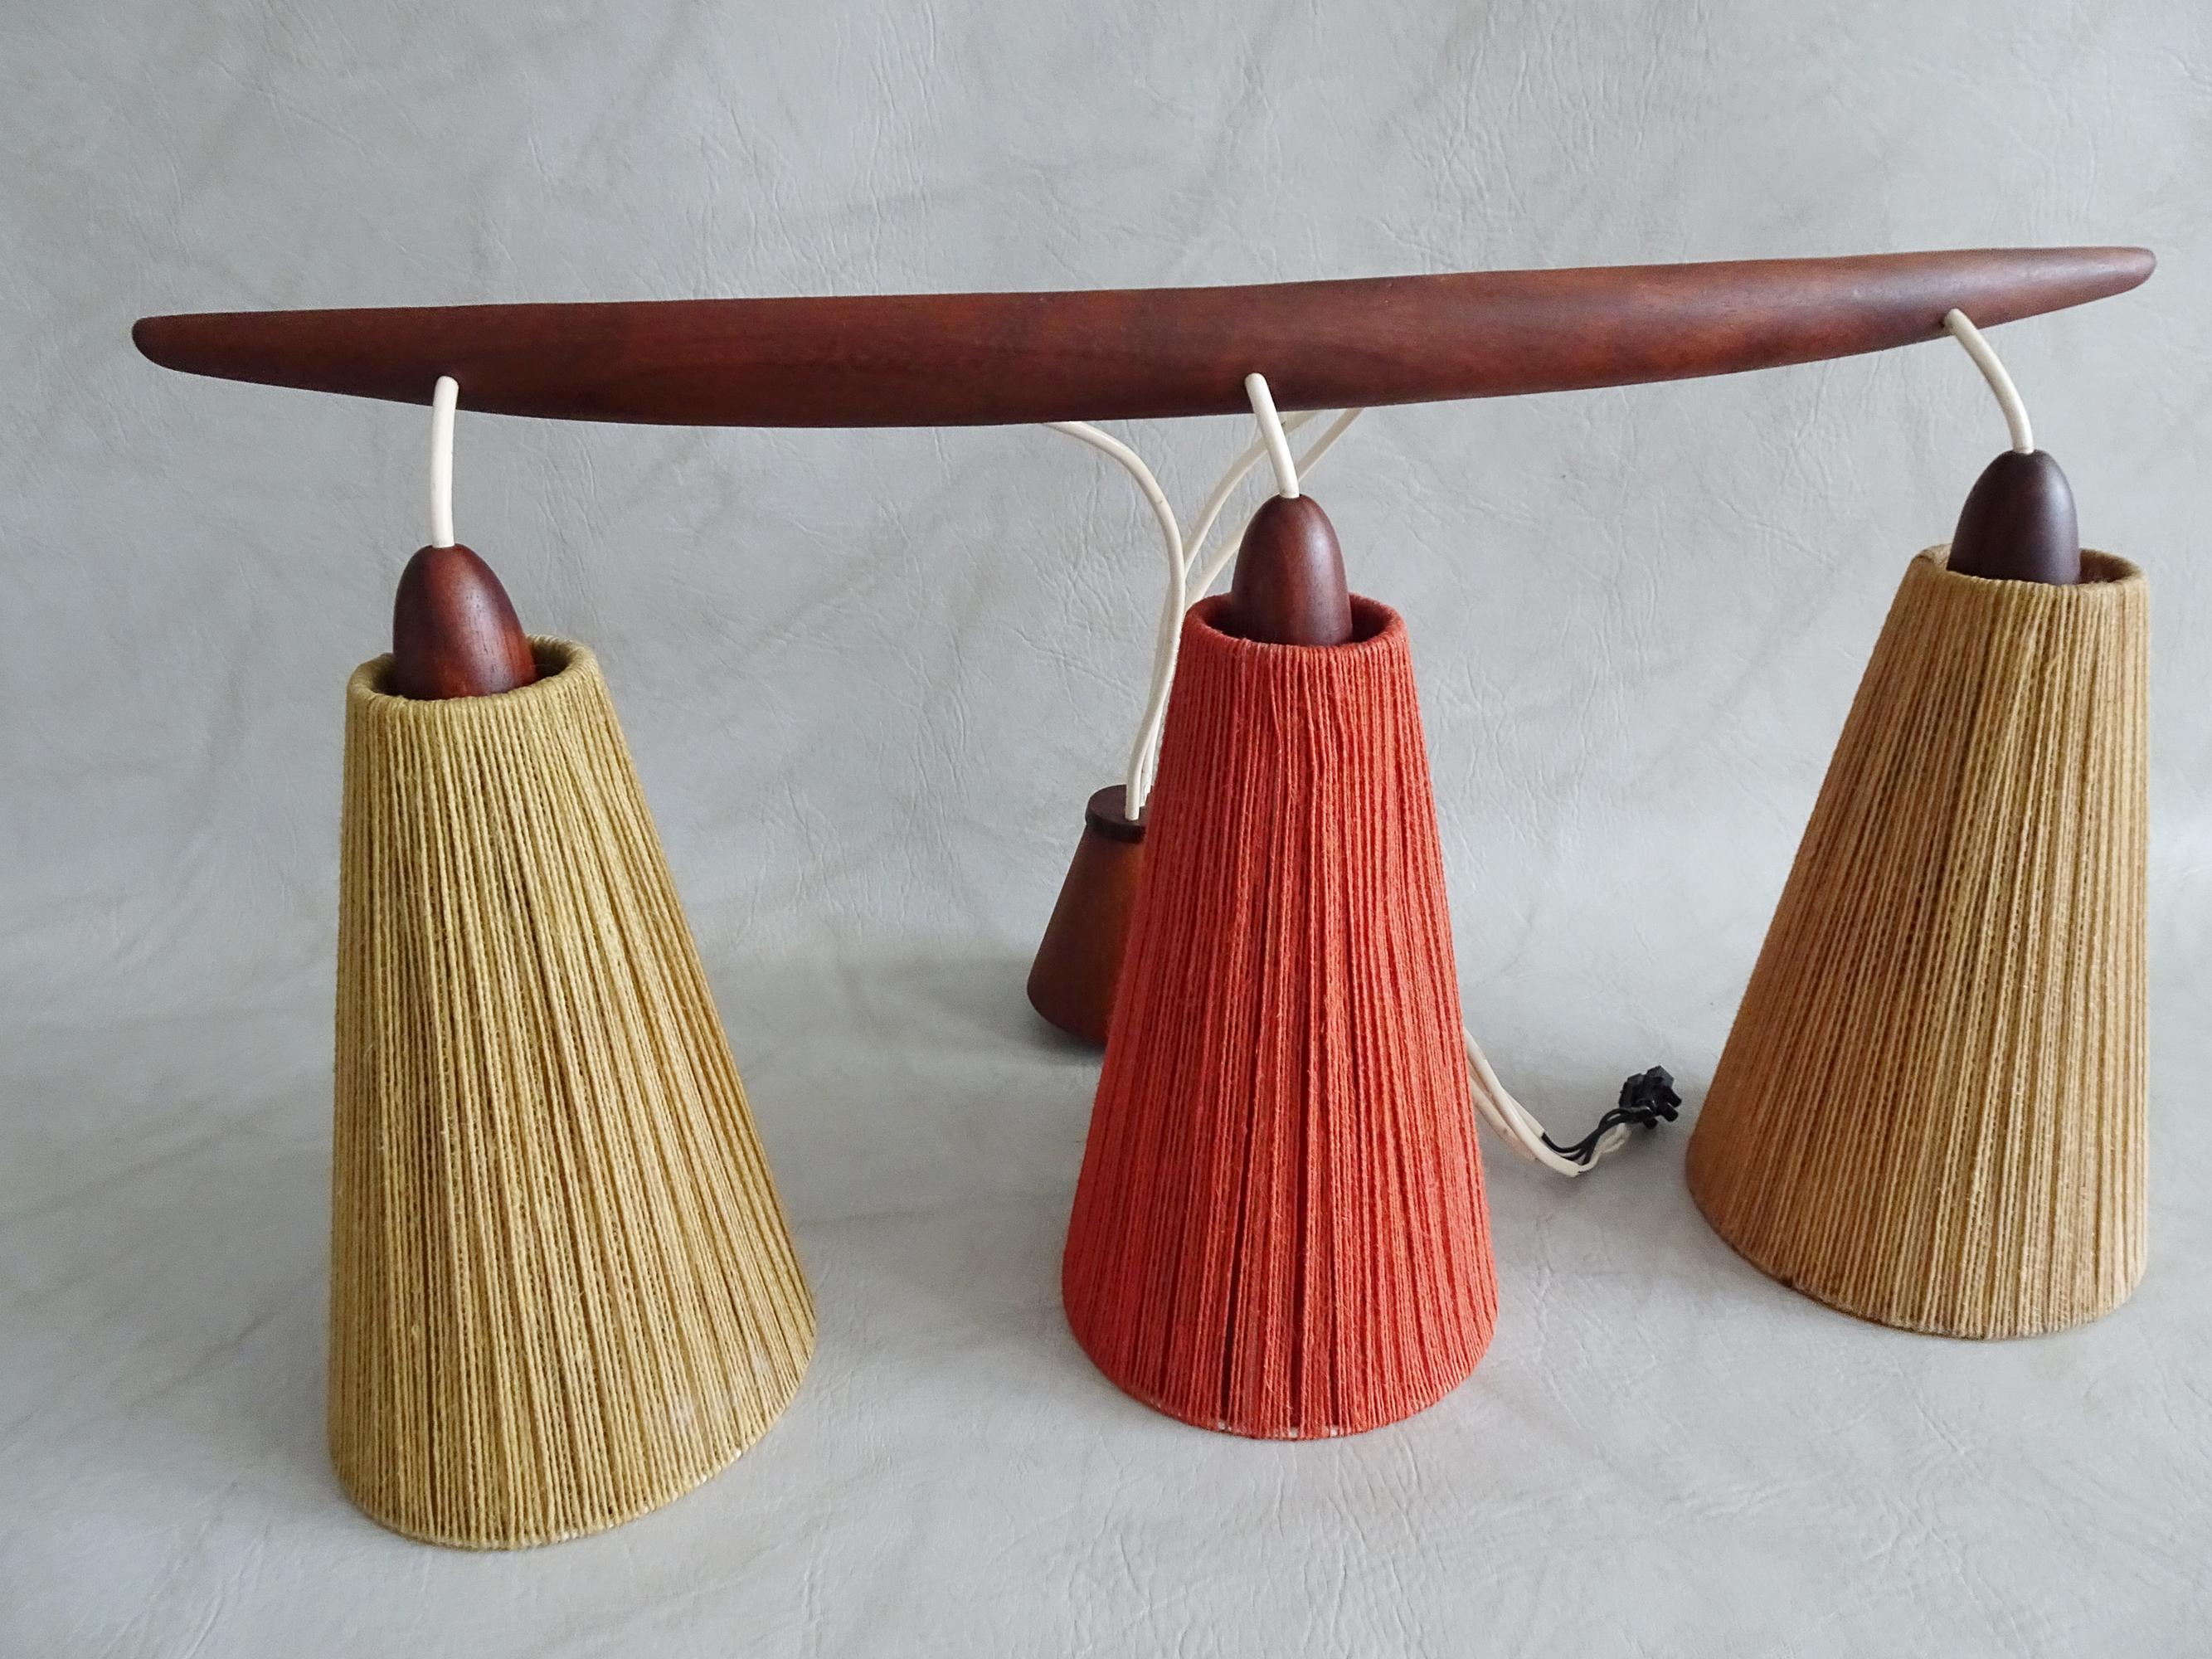 Midcentury Teak and Cord Shade Chandelier by Temde, Germany, 1960 For Sale 1